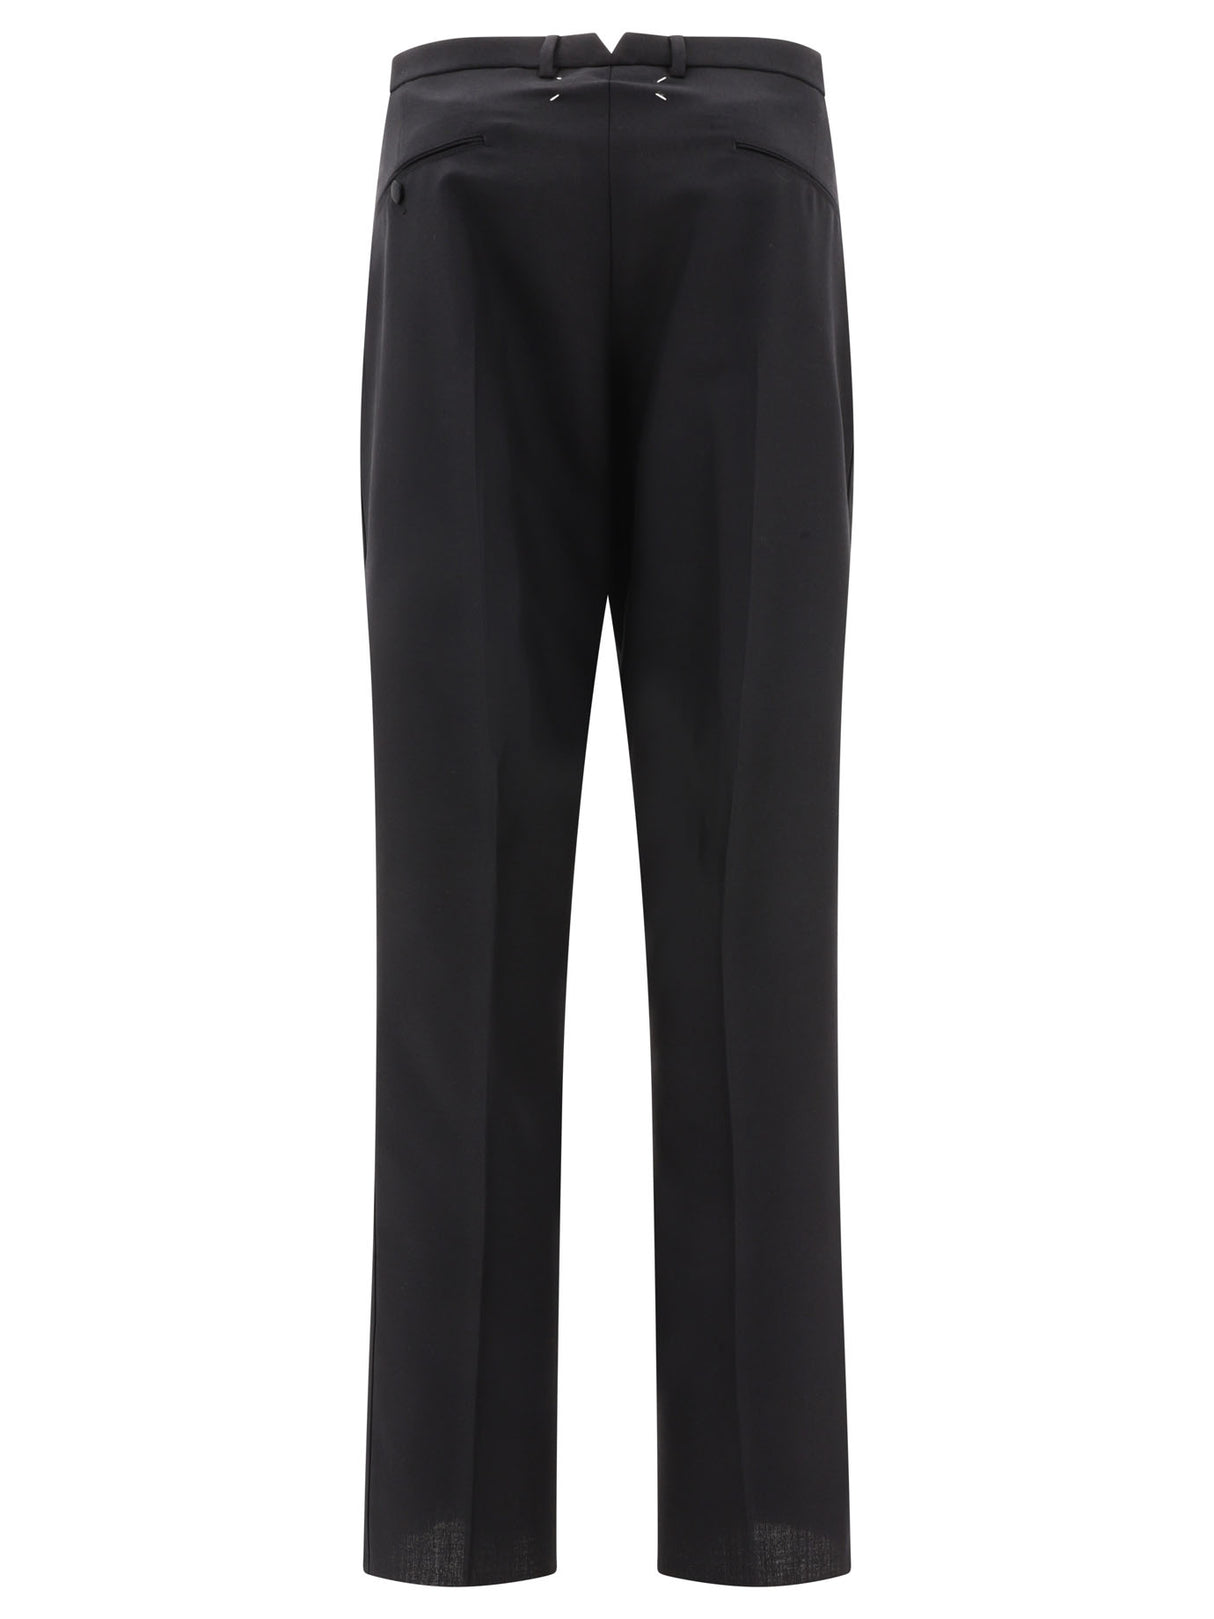 British Mohair Trousers for Men: Regular Fit, Tapered Leg, Central Pleats